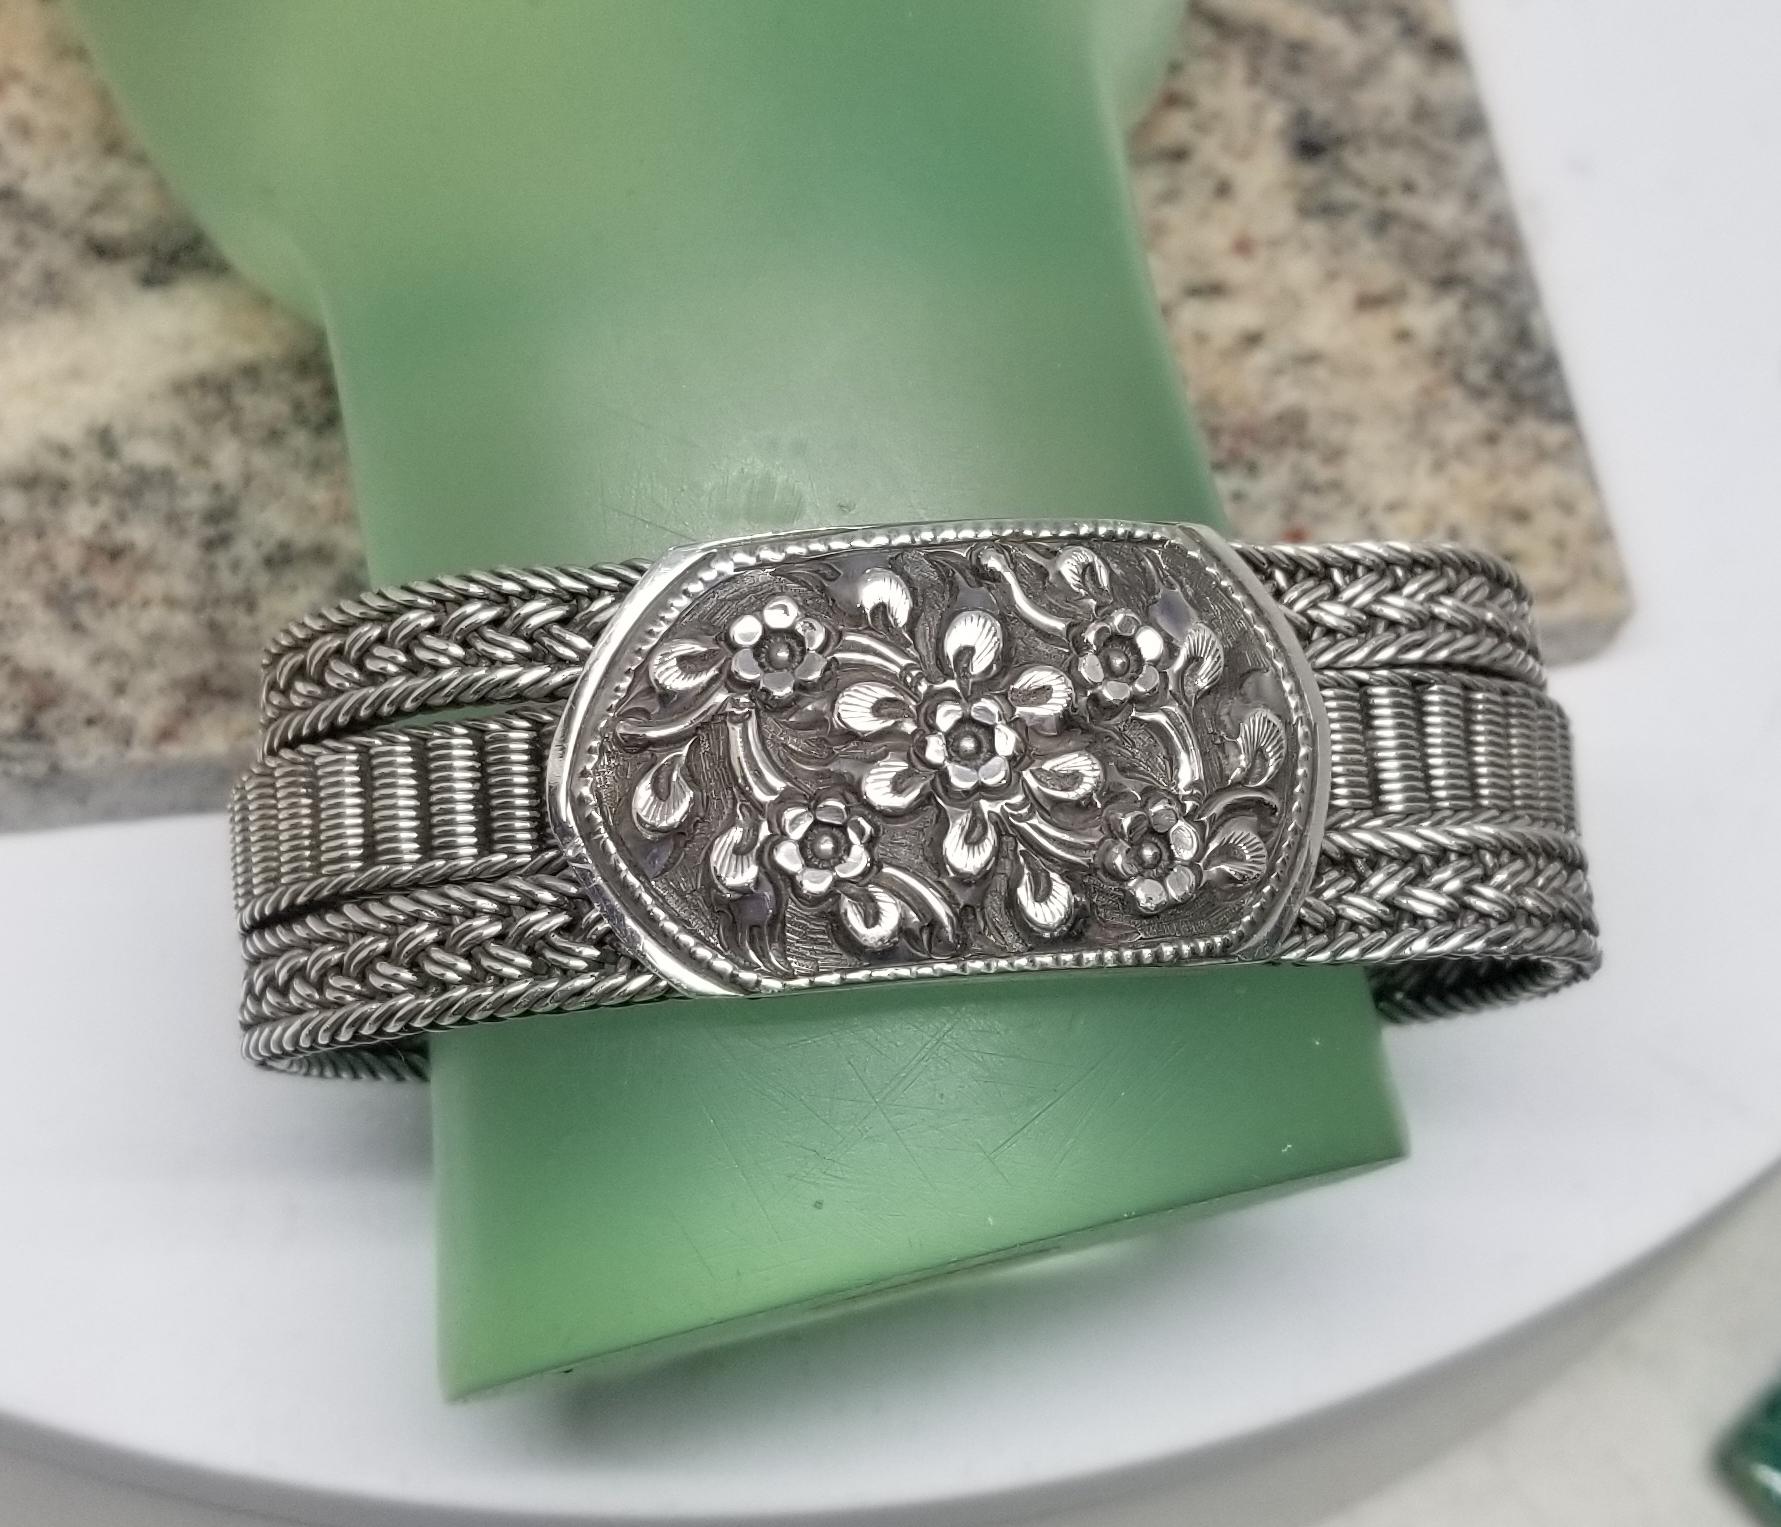 Silver 3 row mesh bracelet with flower motif center and on clasp 1